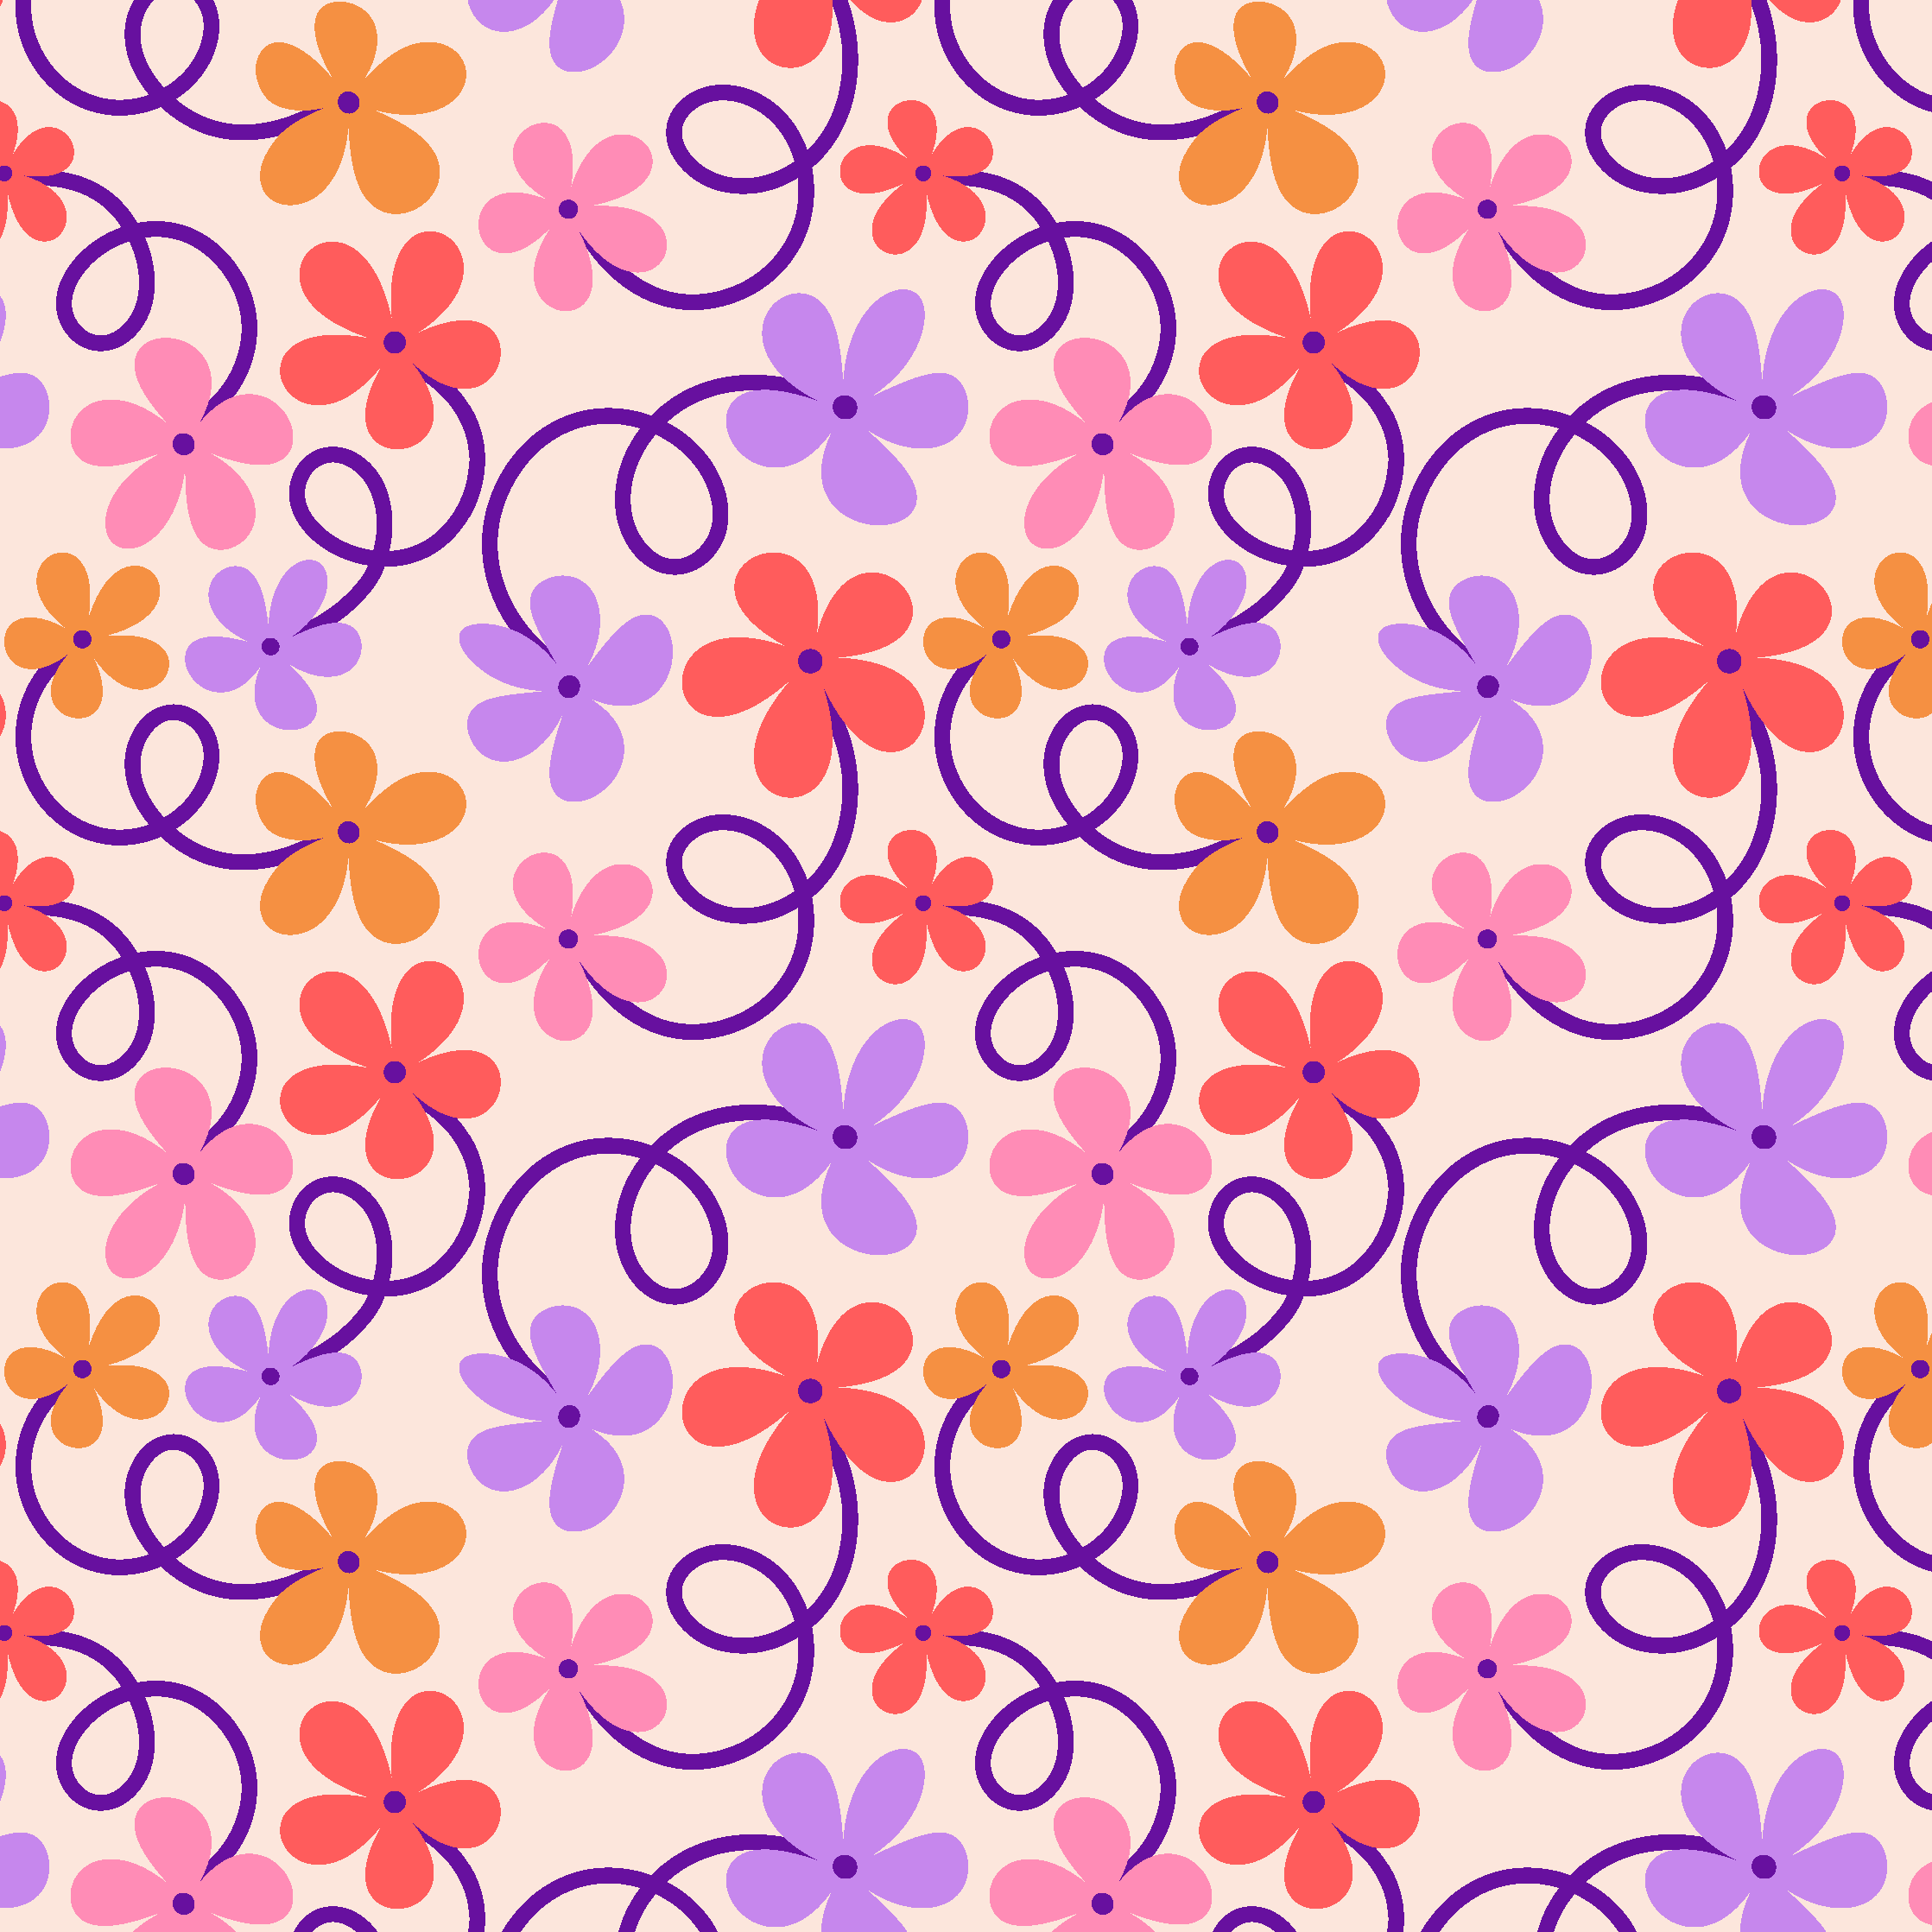 Loopy, Swirly, Playful and Colorful Floral Pattern by Elivera Designs 